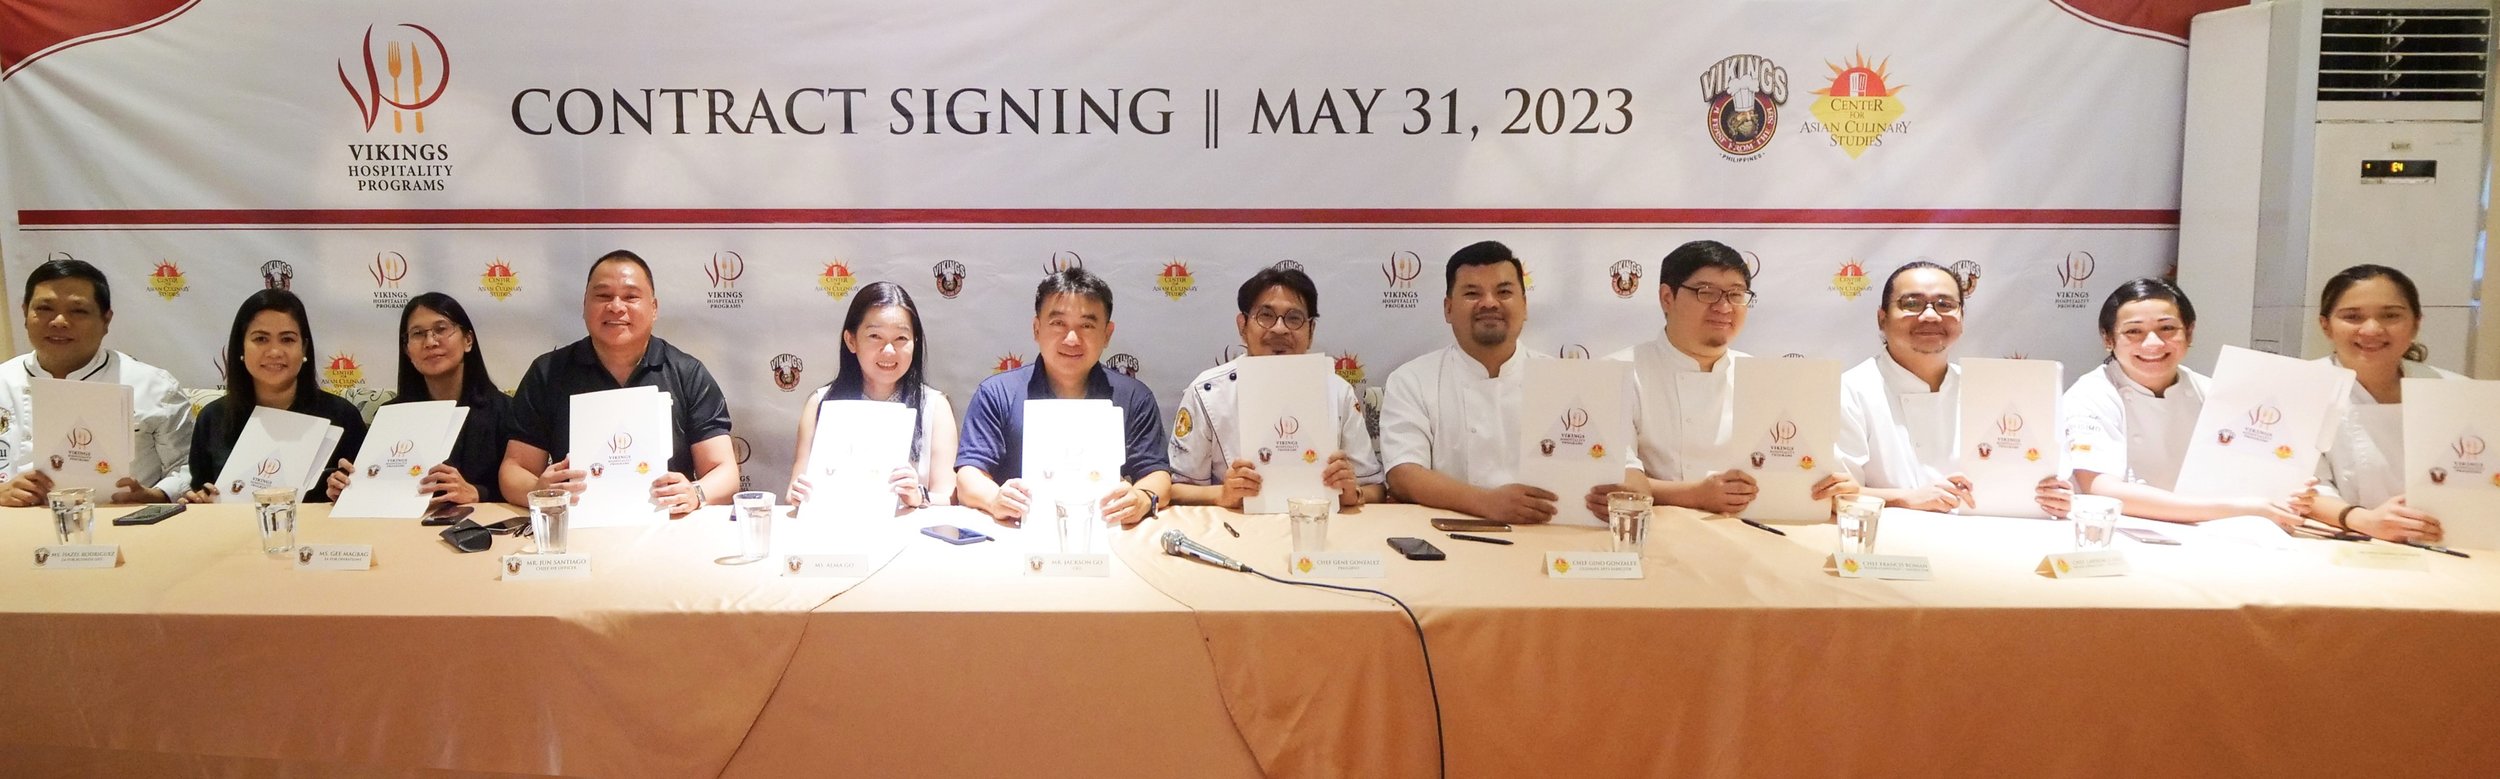 VHP Contract Signing_6.jpg